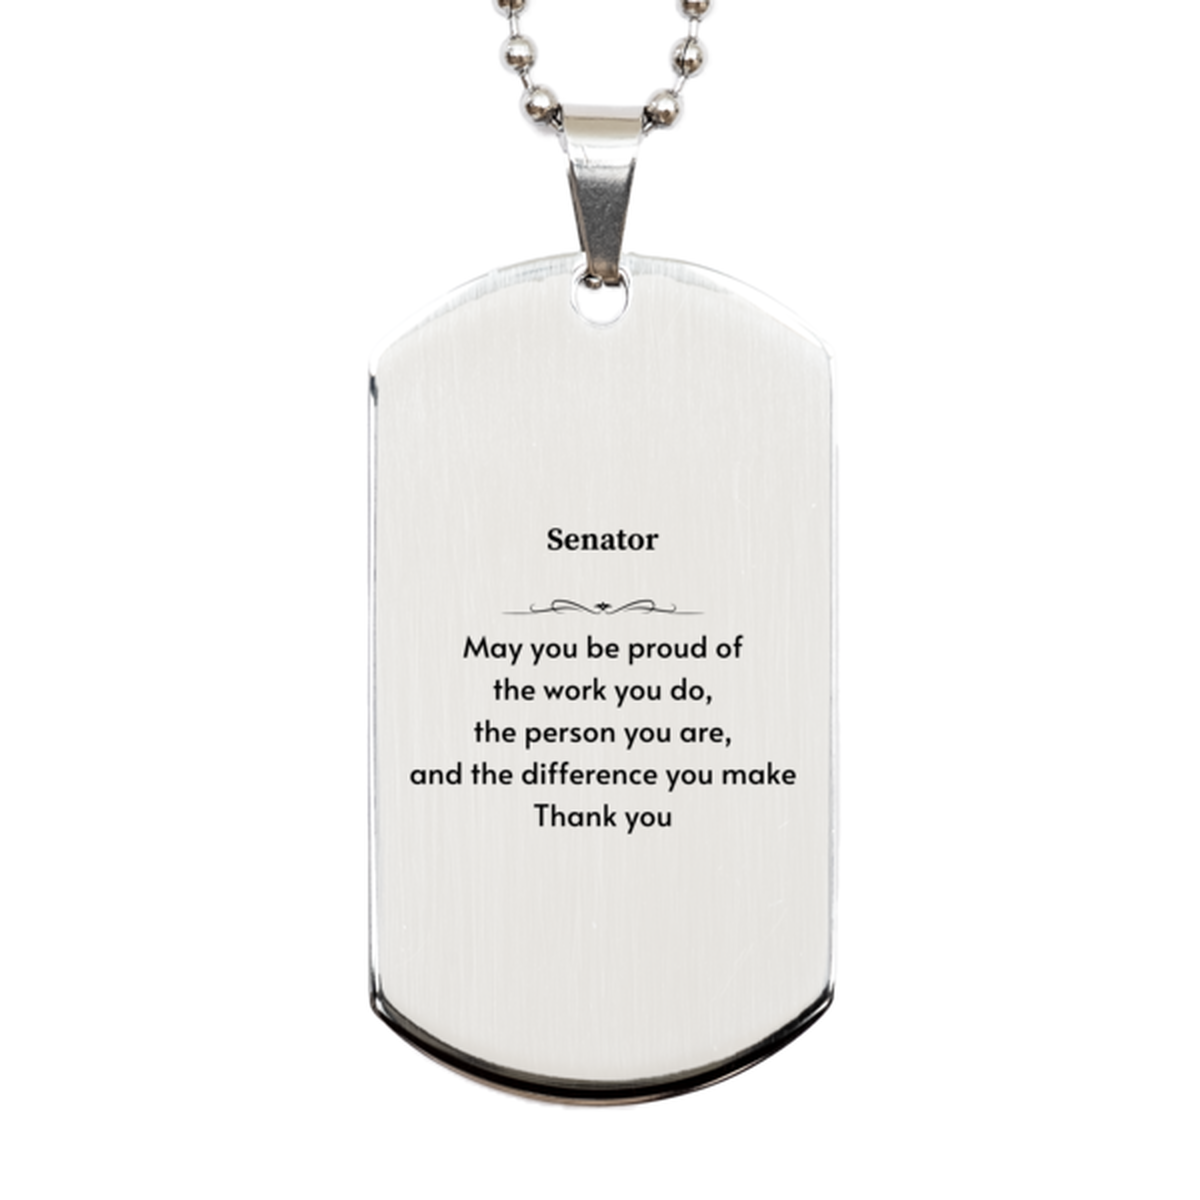 Heartwarming Silver Dog Tag Retirement Coworkers Gifts for Senator, Senator May You be proud of the work you do, the person you are Gifts for Boss Men Women Friends